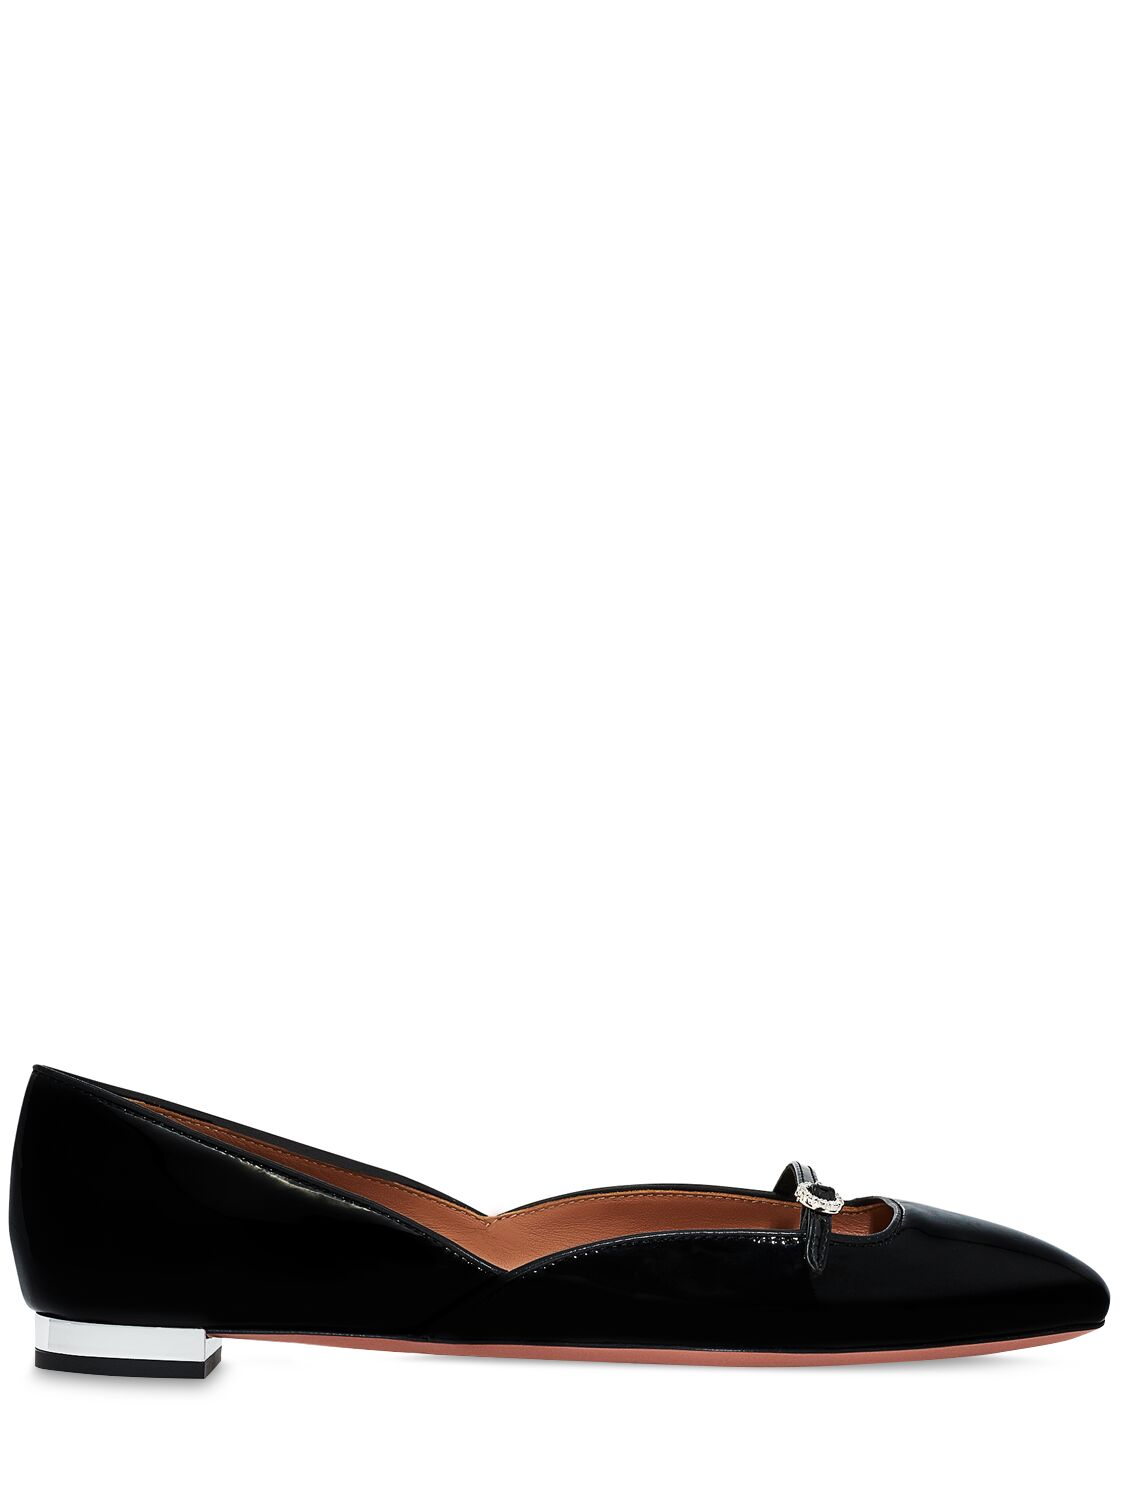 Image of Soul Sister Patent Leather Flats